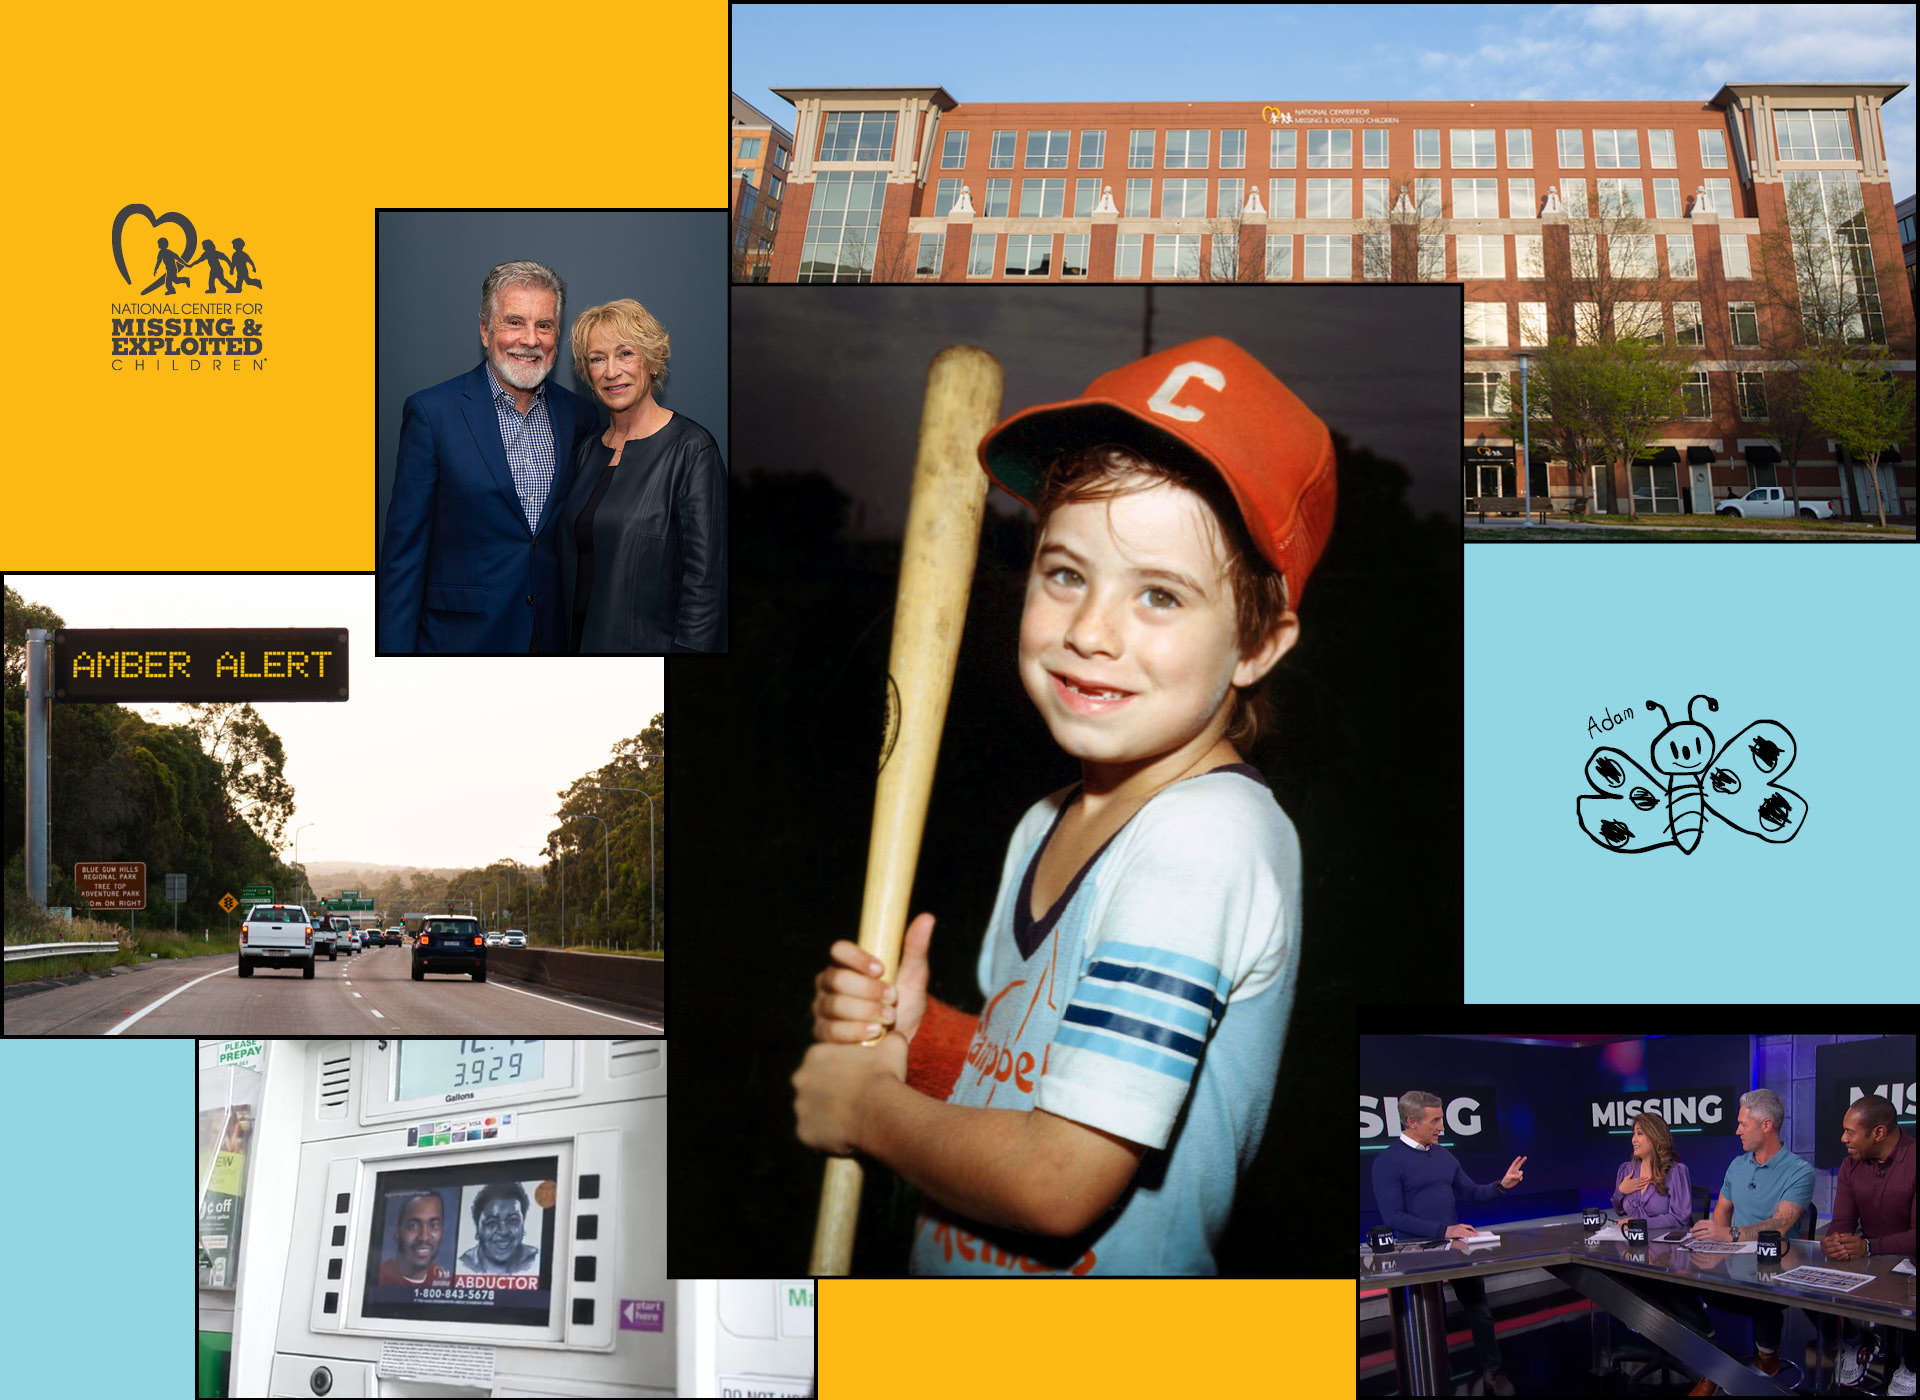 collage of pictures including adam, little boy, wearing red baseball cap and holding bat; john and reve walsh; red brick NCMEC headquarters; three people at a news desk; butterfly drawn by adam; amber alert sign on highway